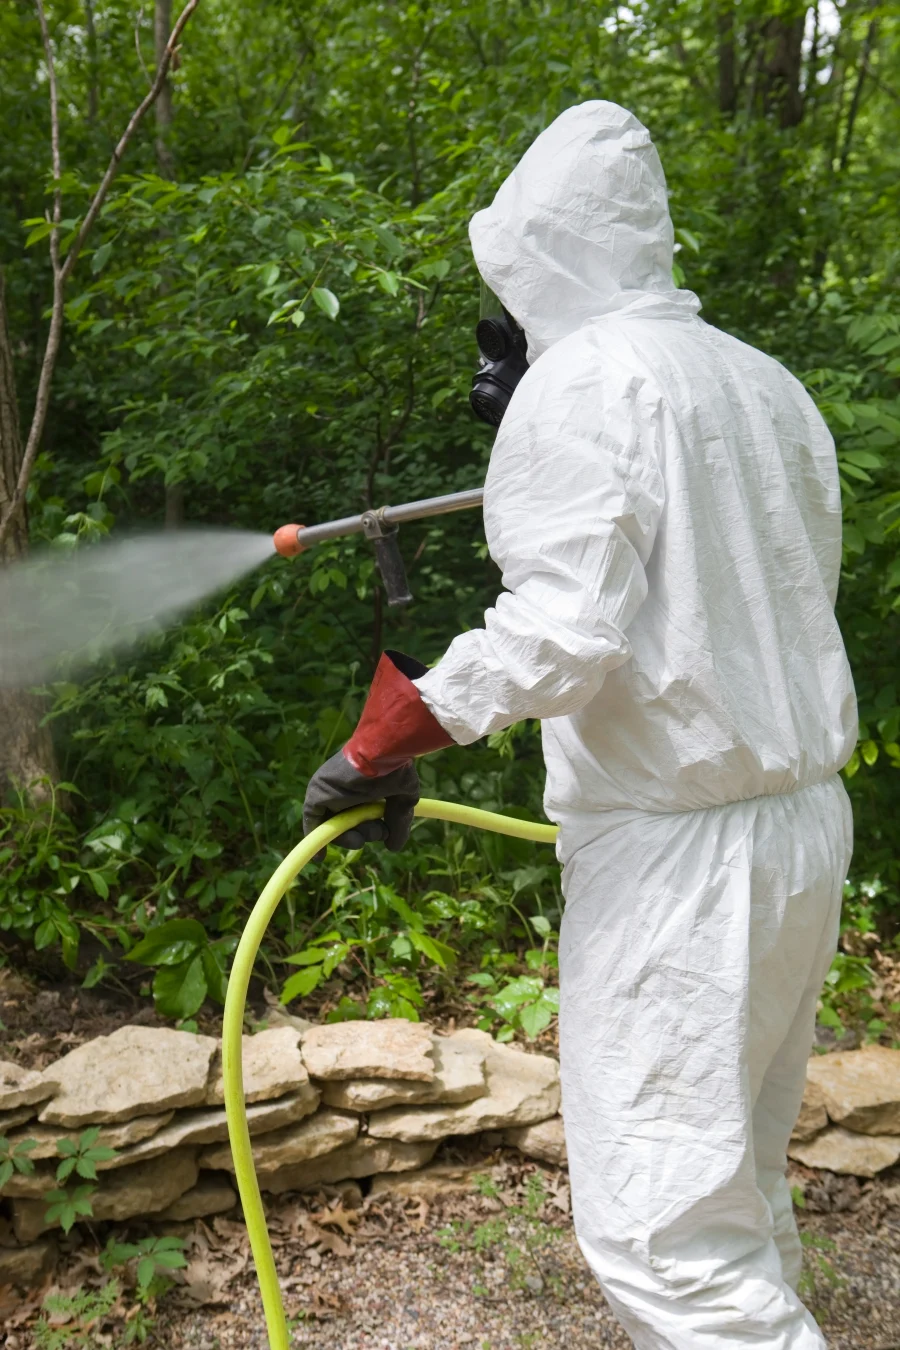 A person spraying their yard with acaricides